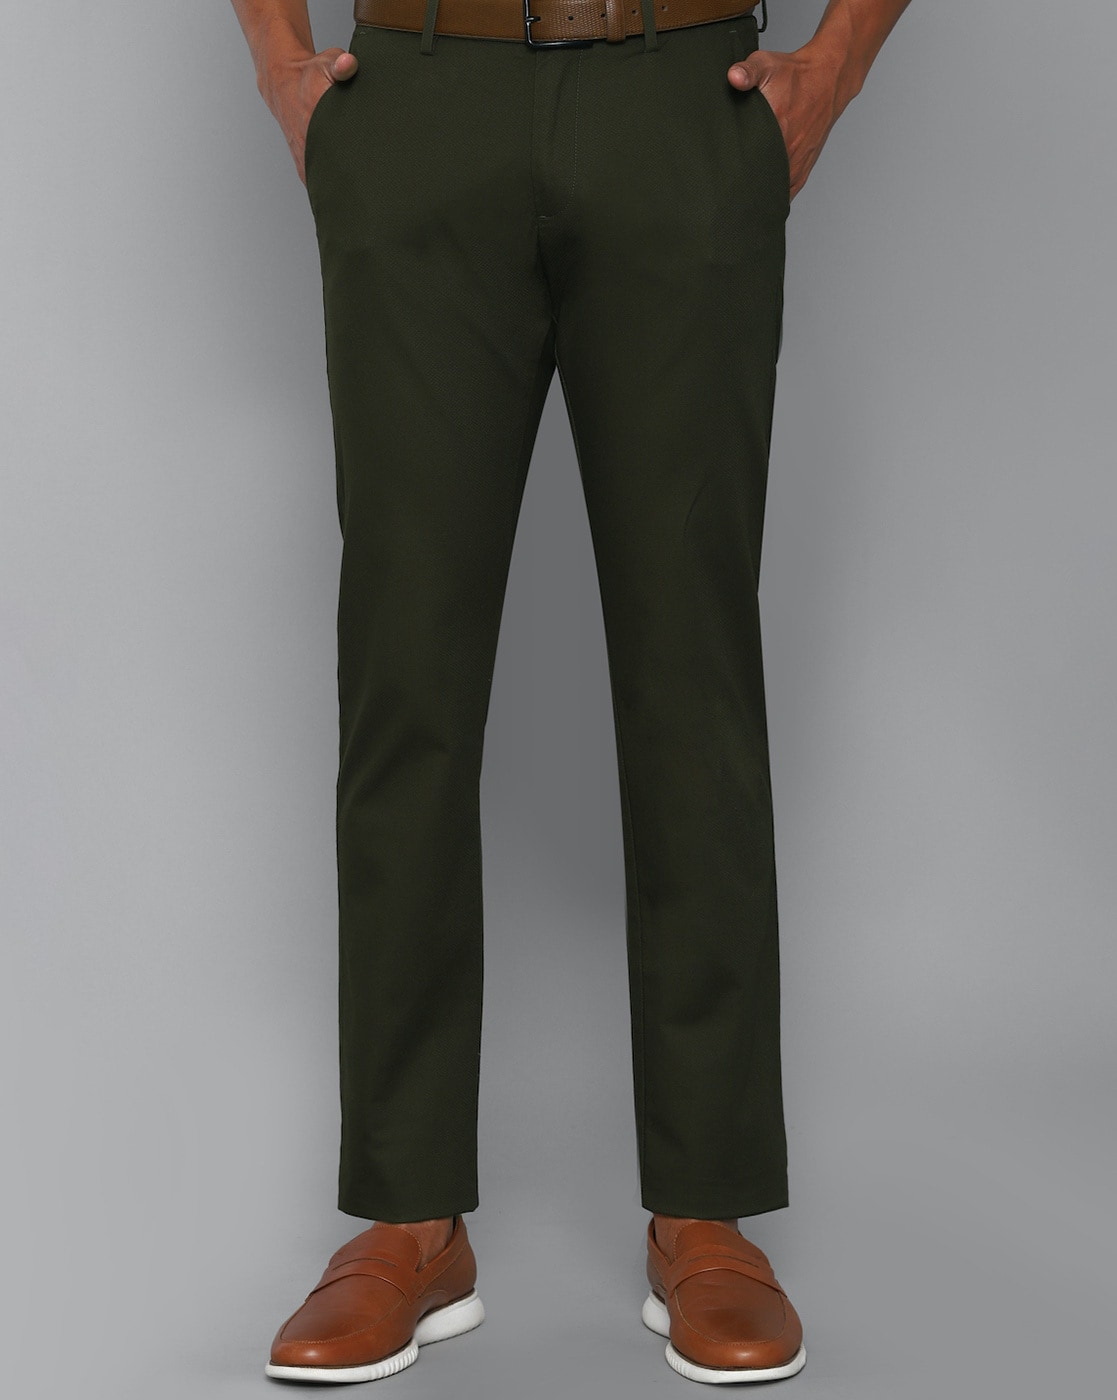 ANKLE FORMAL TROUSERS  DARK GREEN  Byzantic